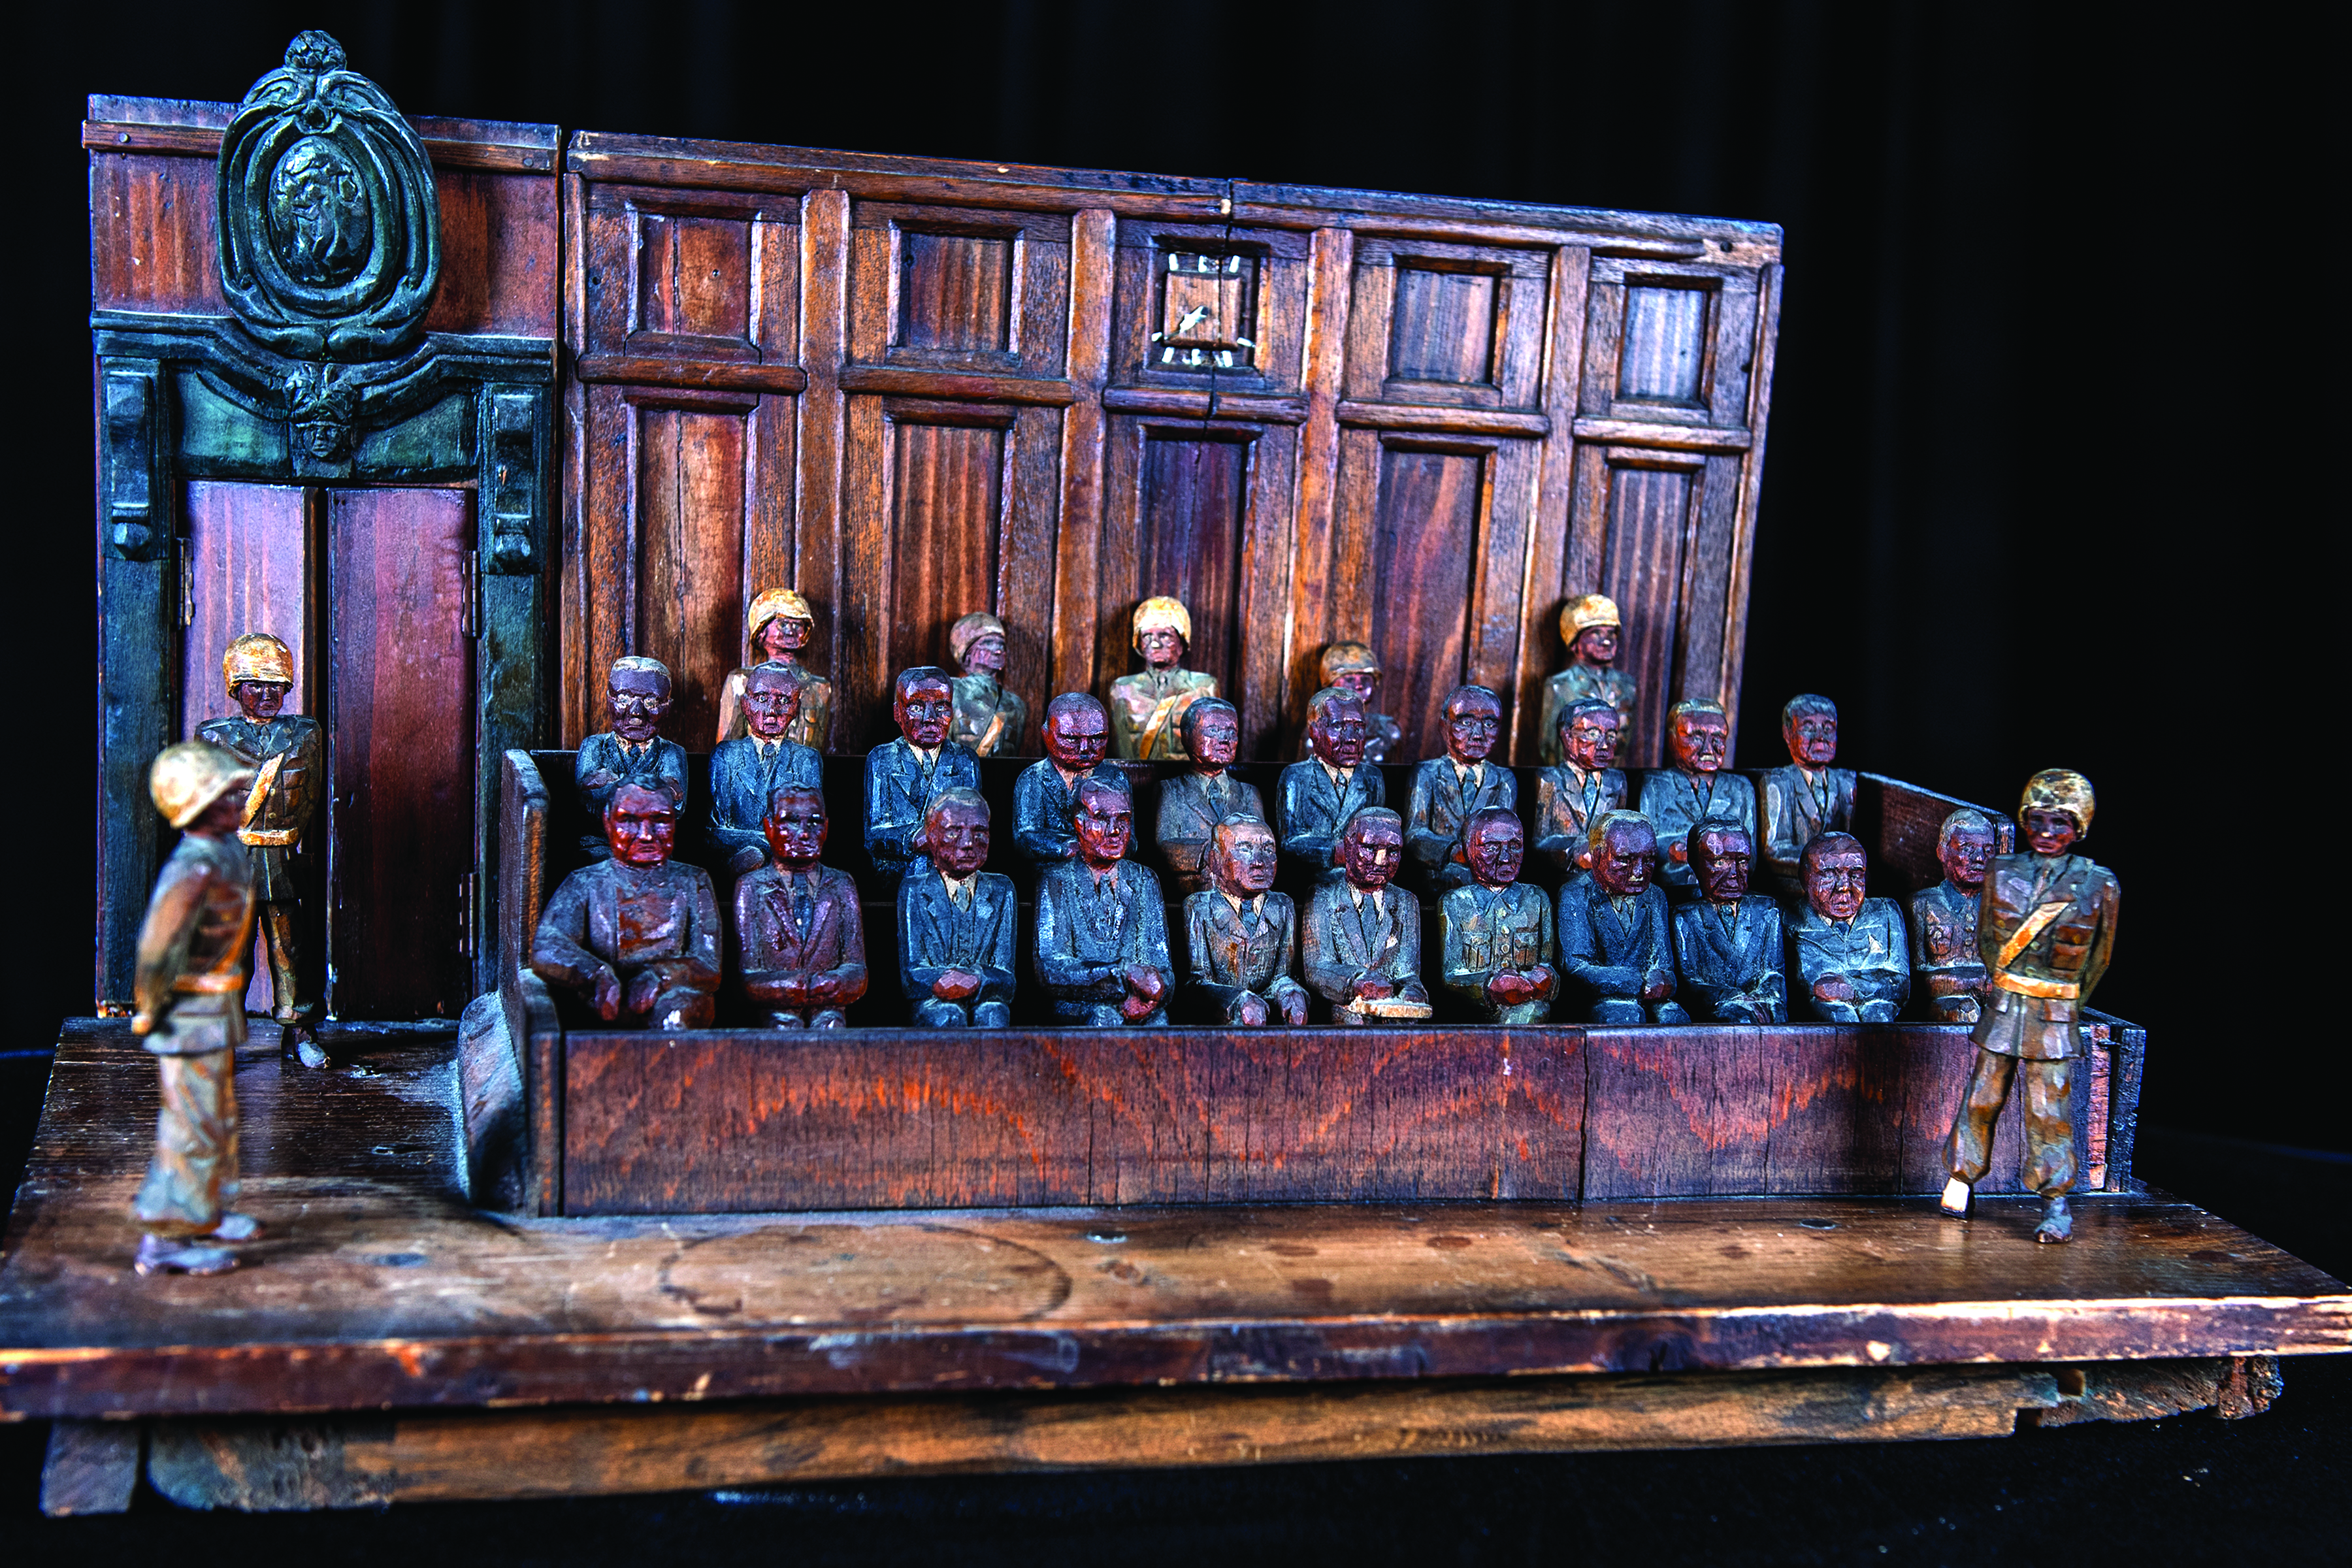 A hand-carved sculpture of the IMT defendants’
        box, made by one of the American guards. The
        sculpture is on display in the library at TJAGLCS.
        (Credit: Jason Wilkerson, TJAGLCS)